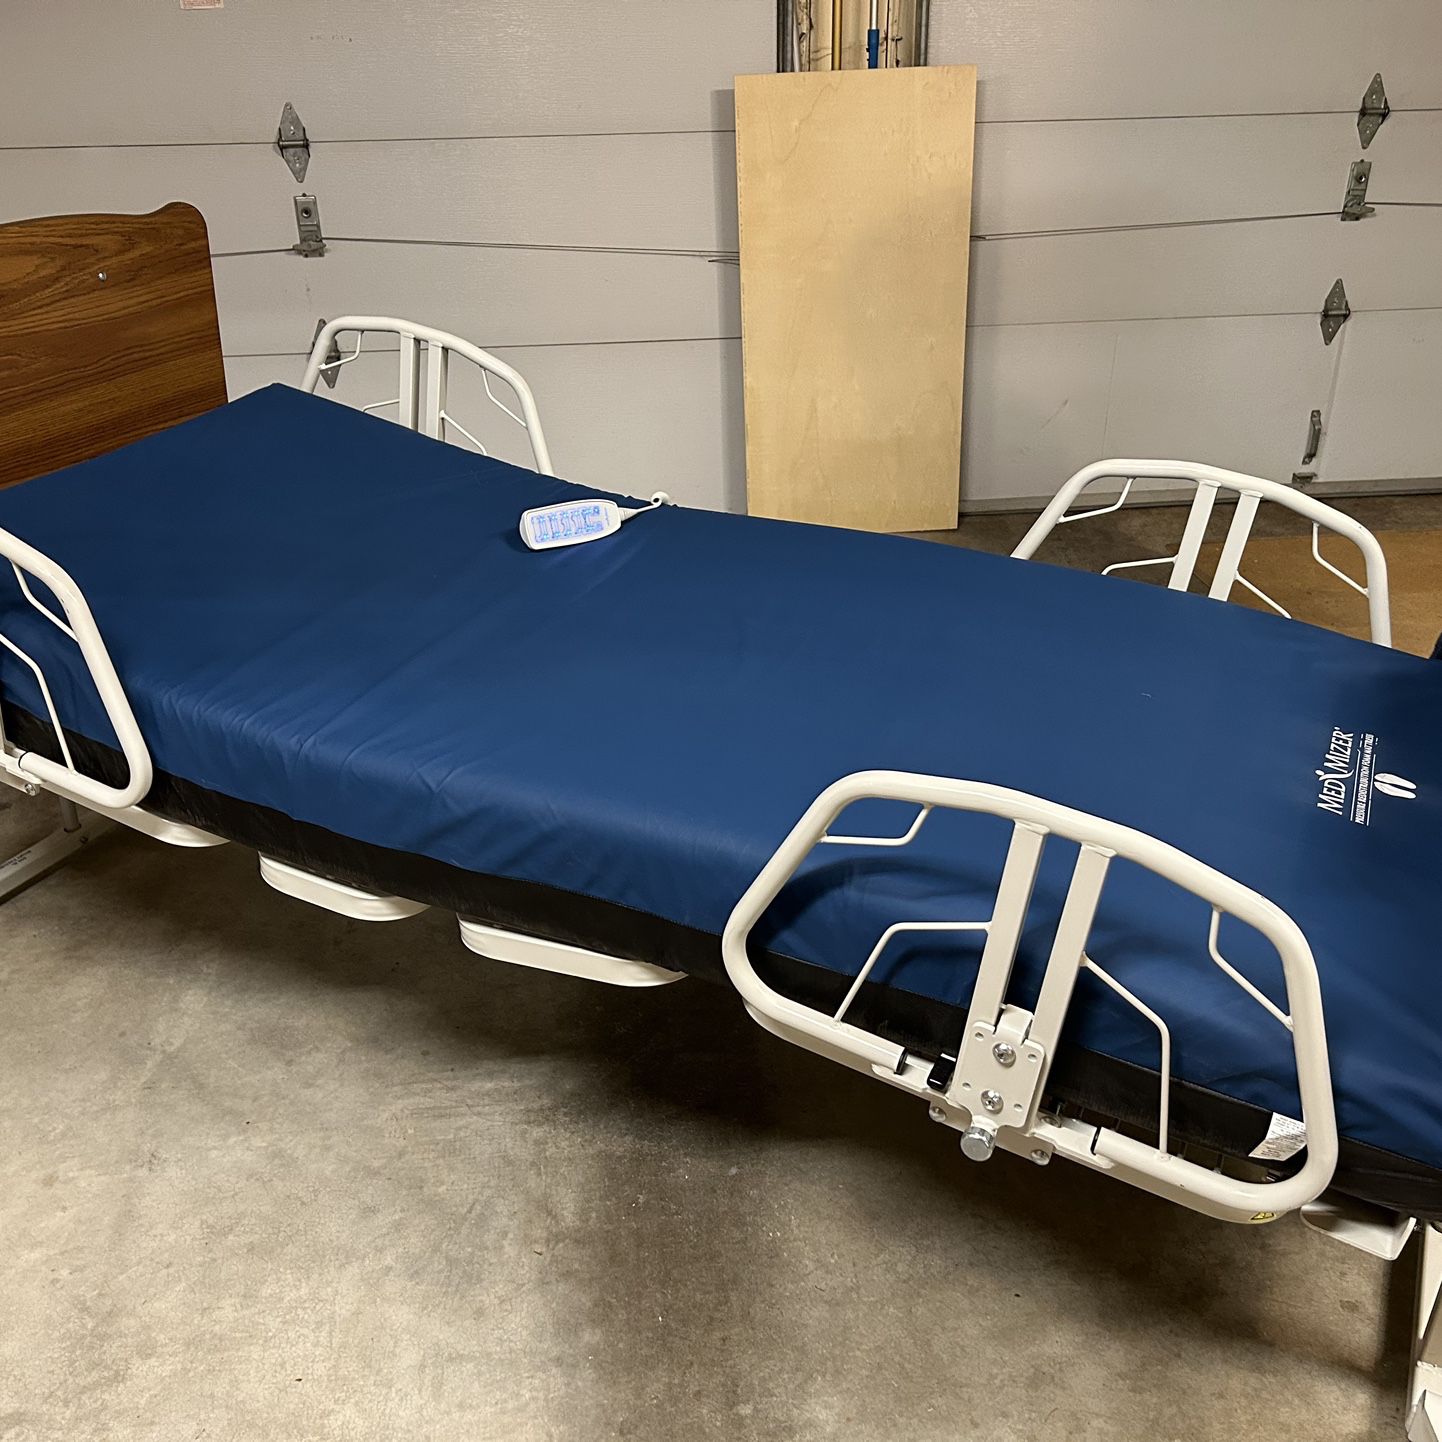 Med-Mizer AllCare-C Multi-function Electrically Adjustable Bed (Like New) Includes Mattress And Accessories